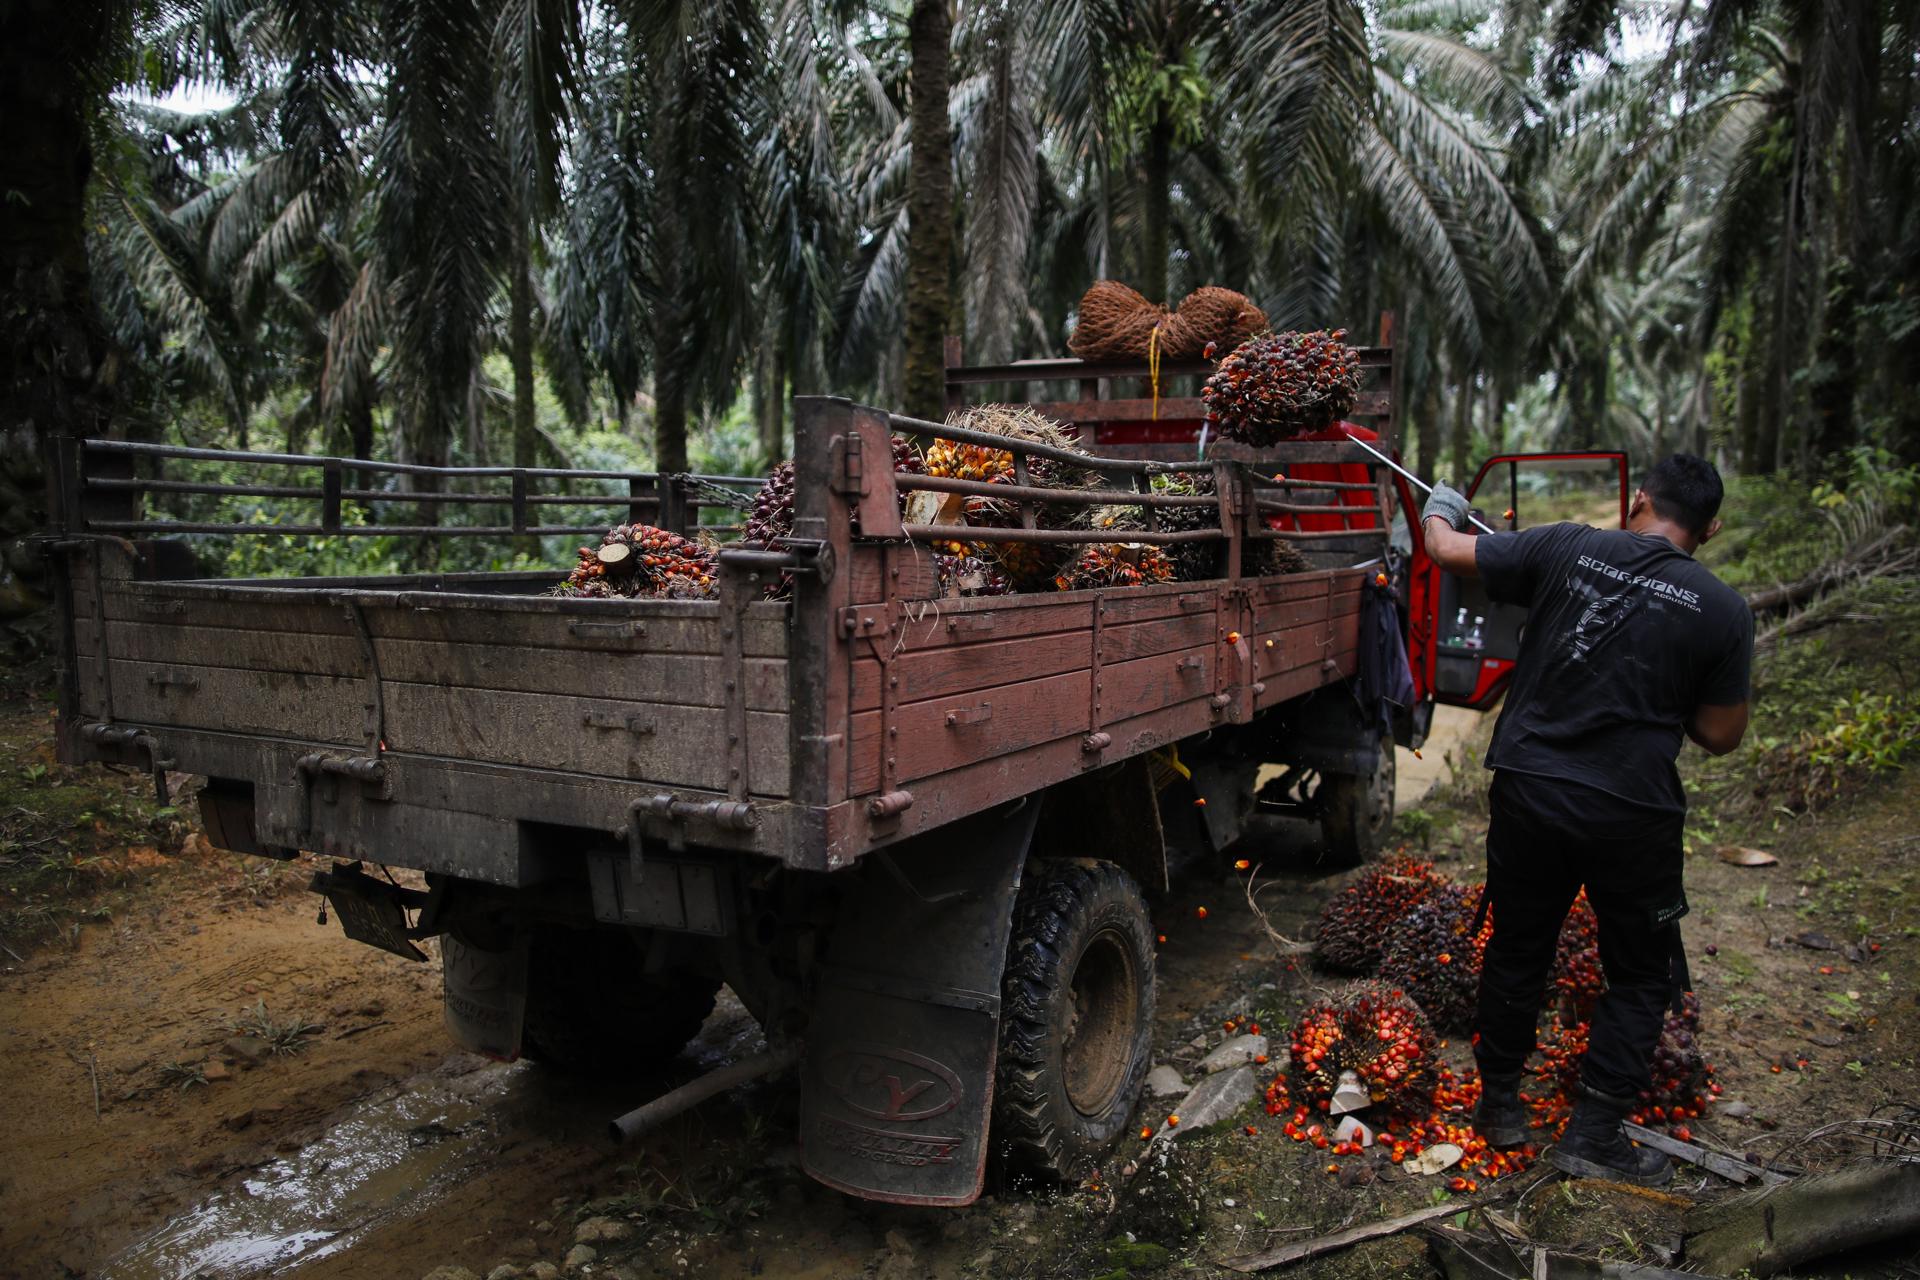 A worker loads harvested palm fruits on a truck at a palm oil plantation in Sabak Bernam, Selangor, Malaysia, 21 July 2023 (issued 28 July 2023). EFE/EPA/FAZRY ISMAIL ATTENTION: This Image is part of a PHOTO SET
